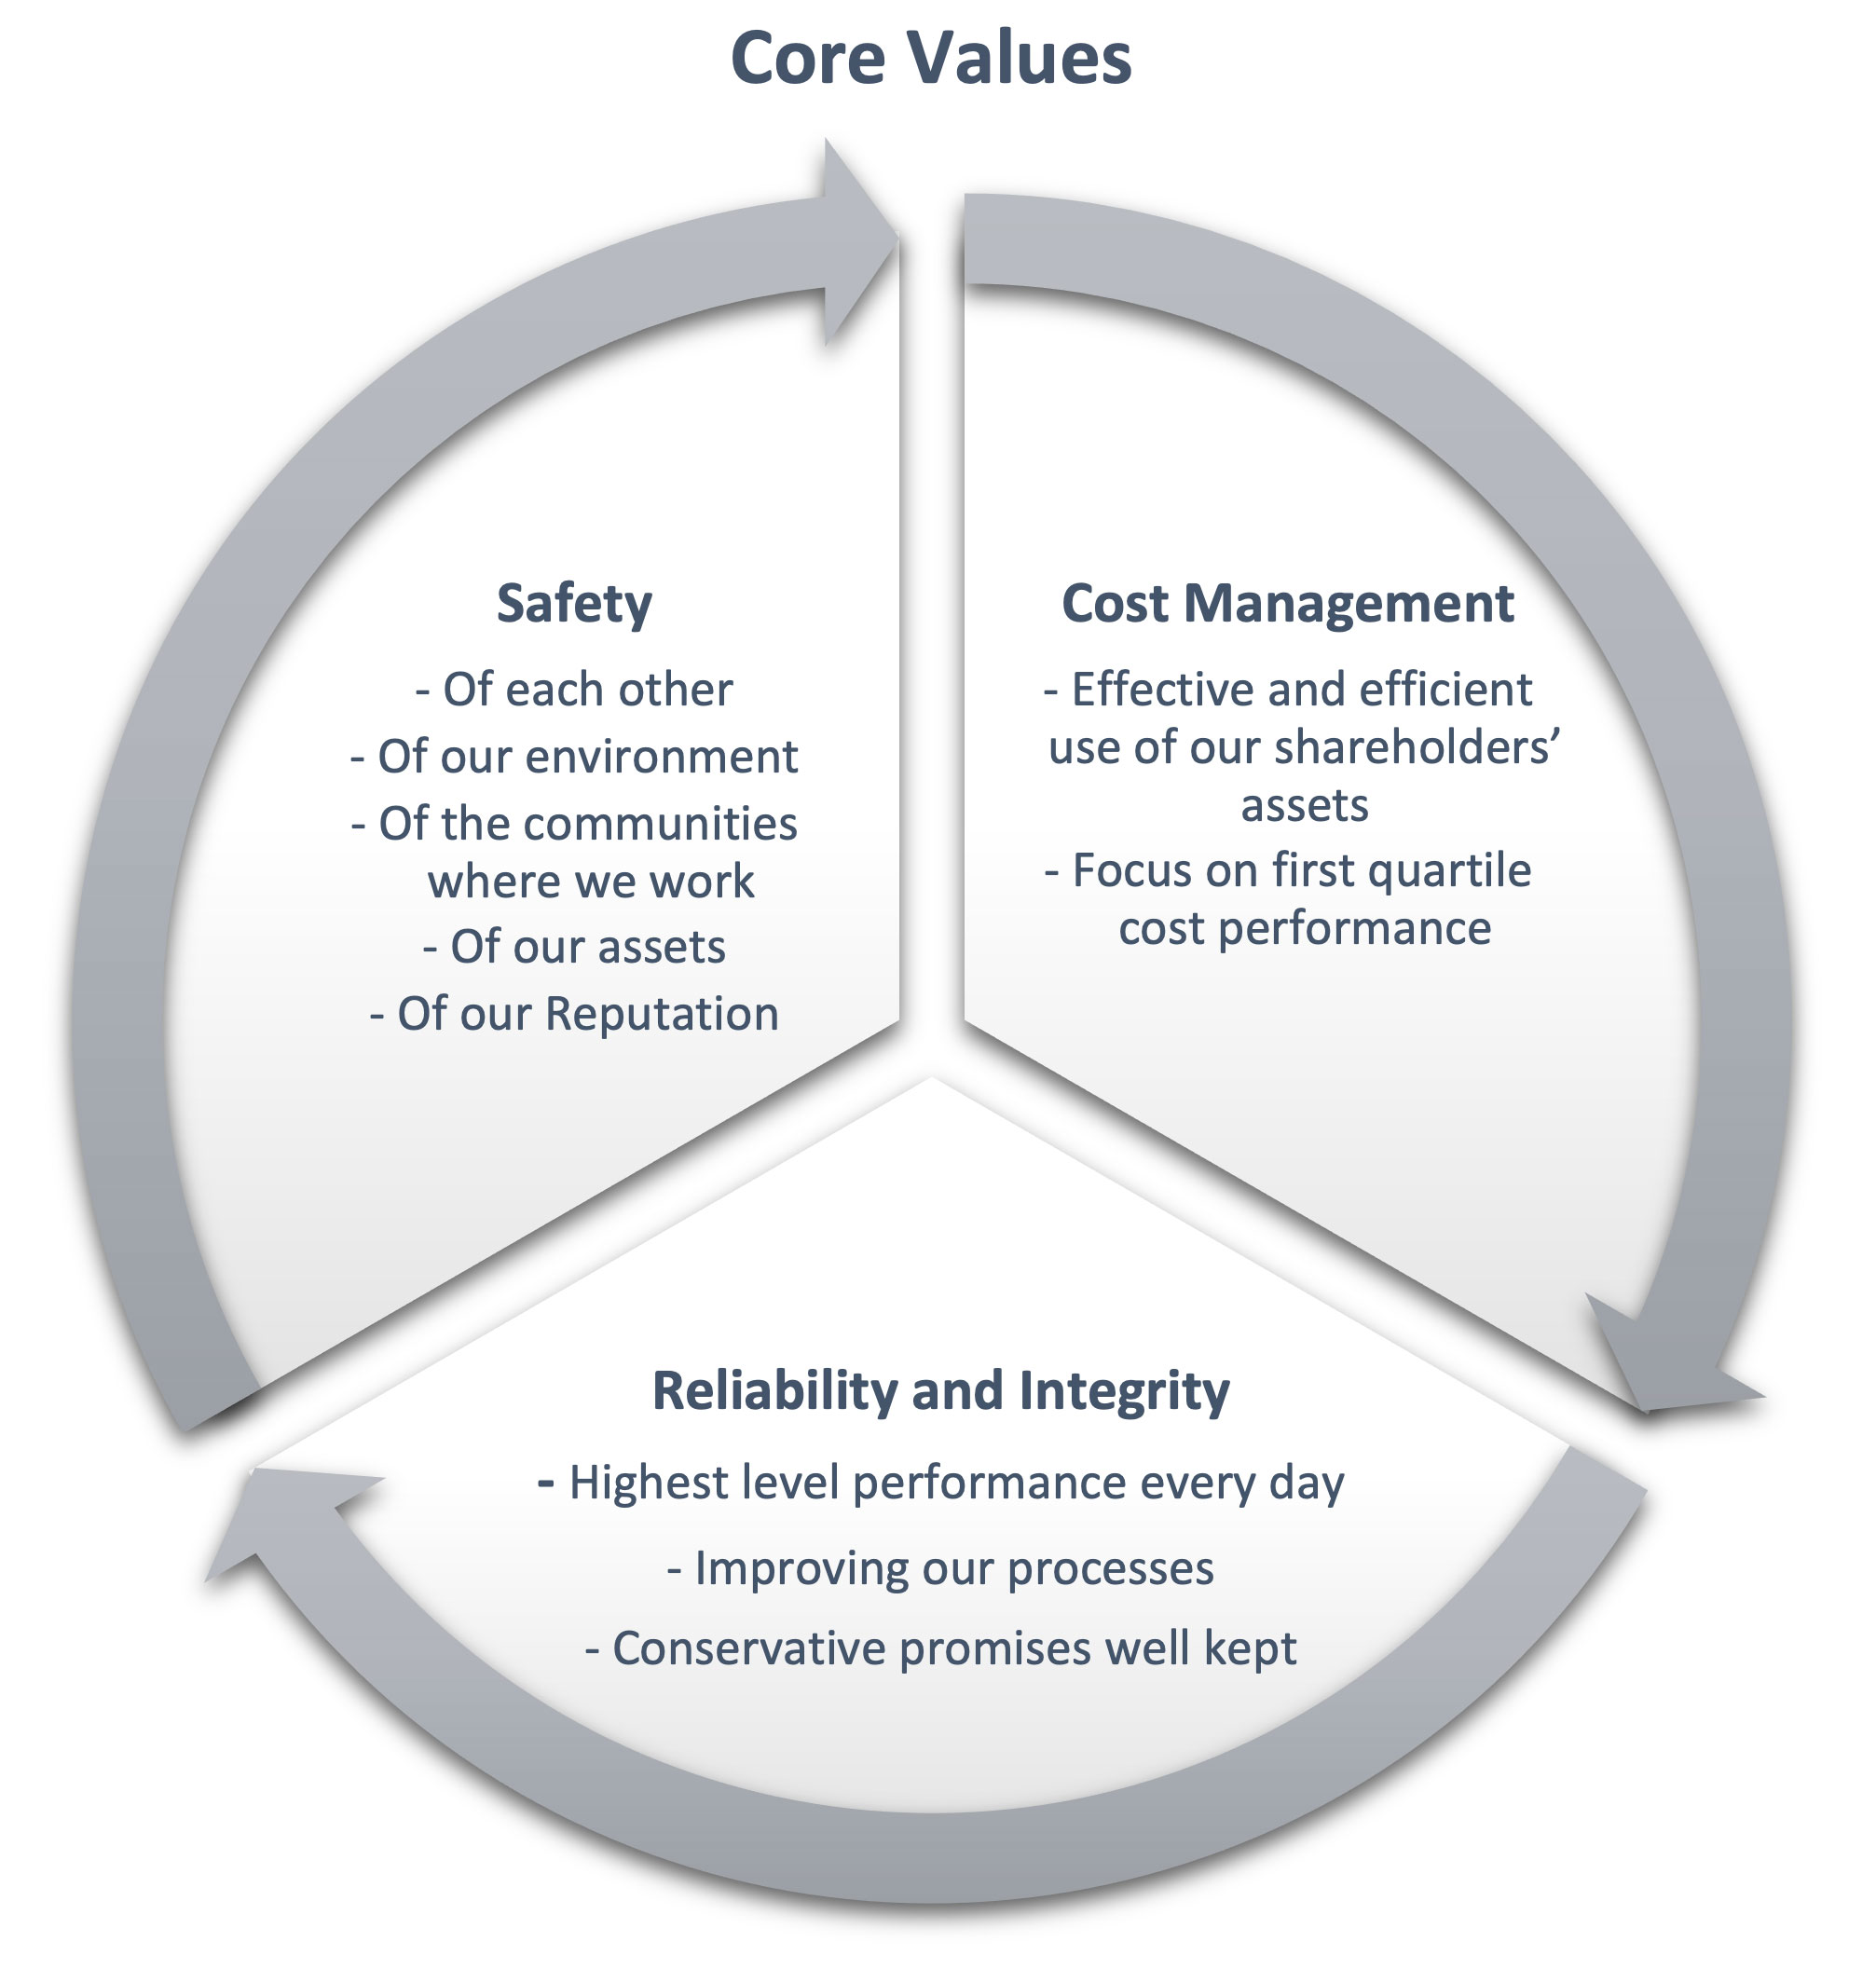 Diagram showing three core values – 1) Safety: Of each other, Of our environment, Of the communities where we work, Of our assets, Of our Reputation. 2) Cost Management: Effective and efficient use of our shareholders’ assets, Focus on first quartile cost performance. 3) Reliability and Integrity: Highest level performance every day, Improving our processes, Conservative promises well kept.